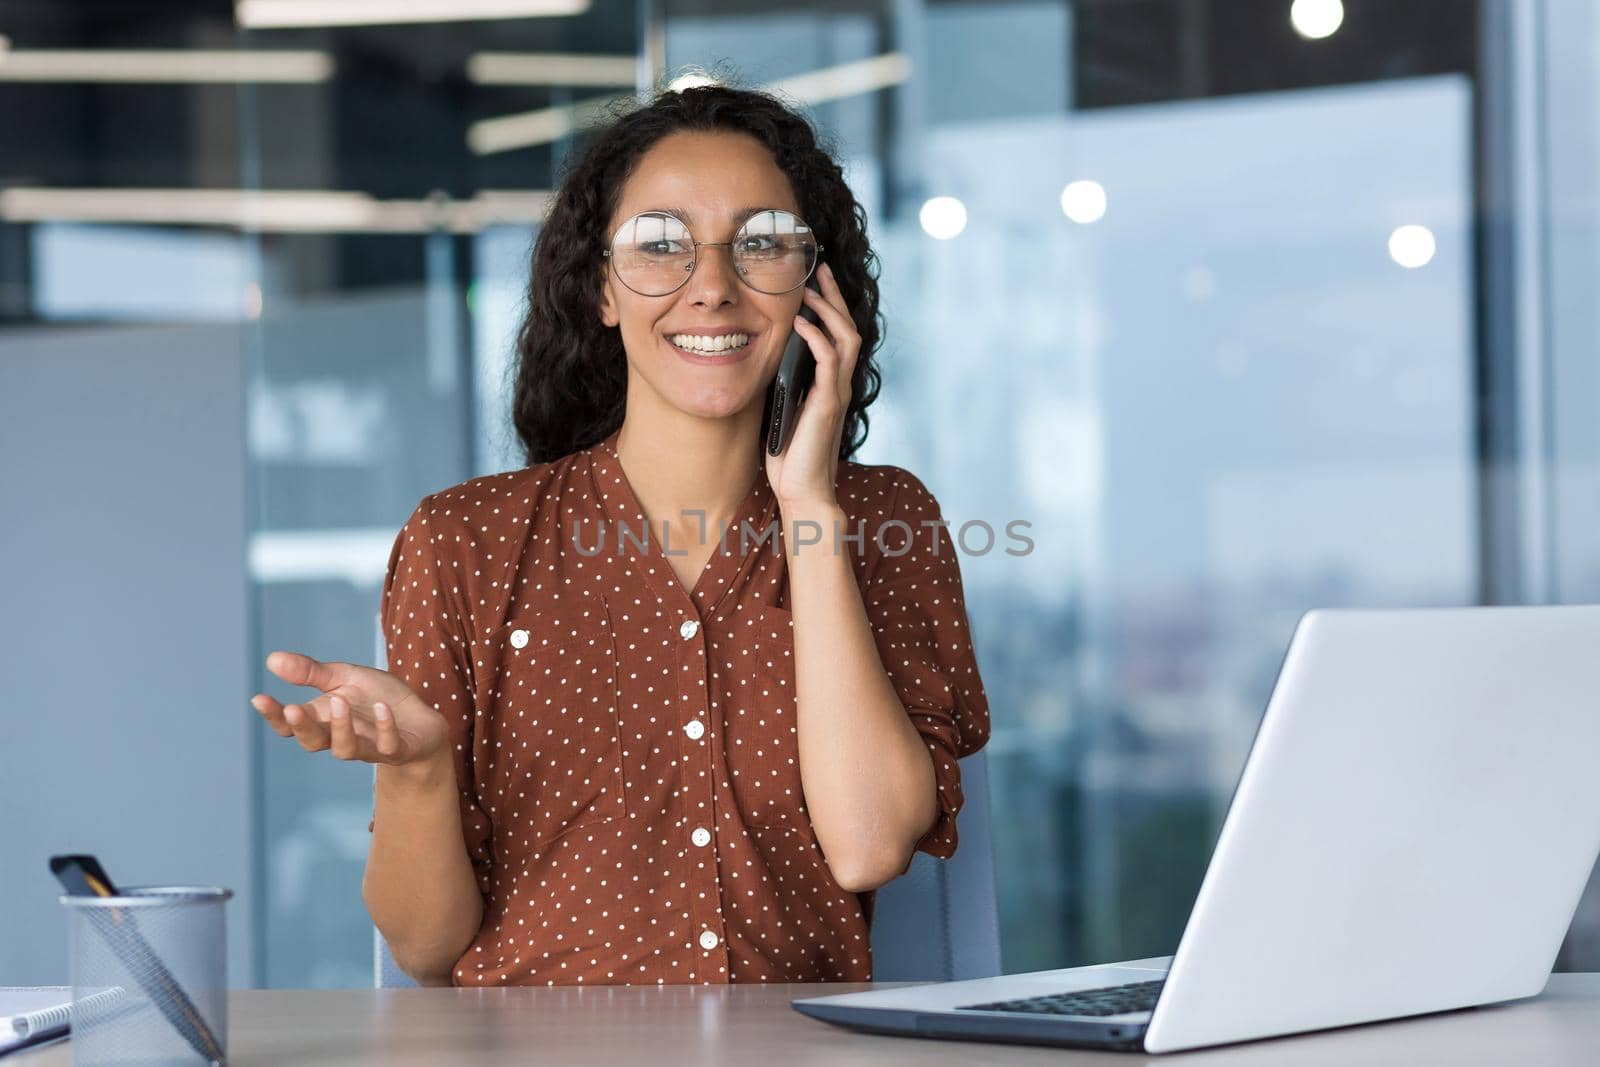 Young beautiful hispanic female freelancer wearing glasses sitting in office at desk with white laptop and talking on phone. He smiles, gestures with his hands.